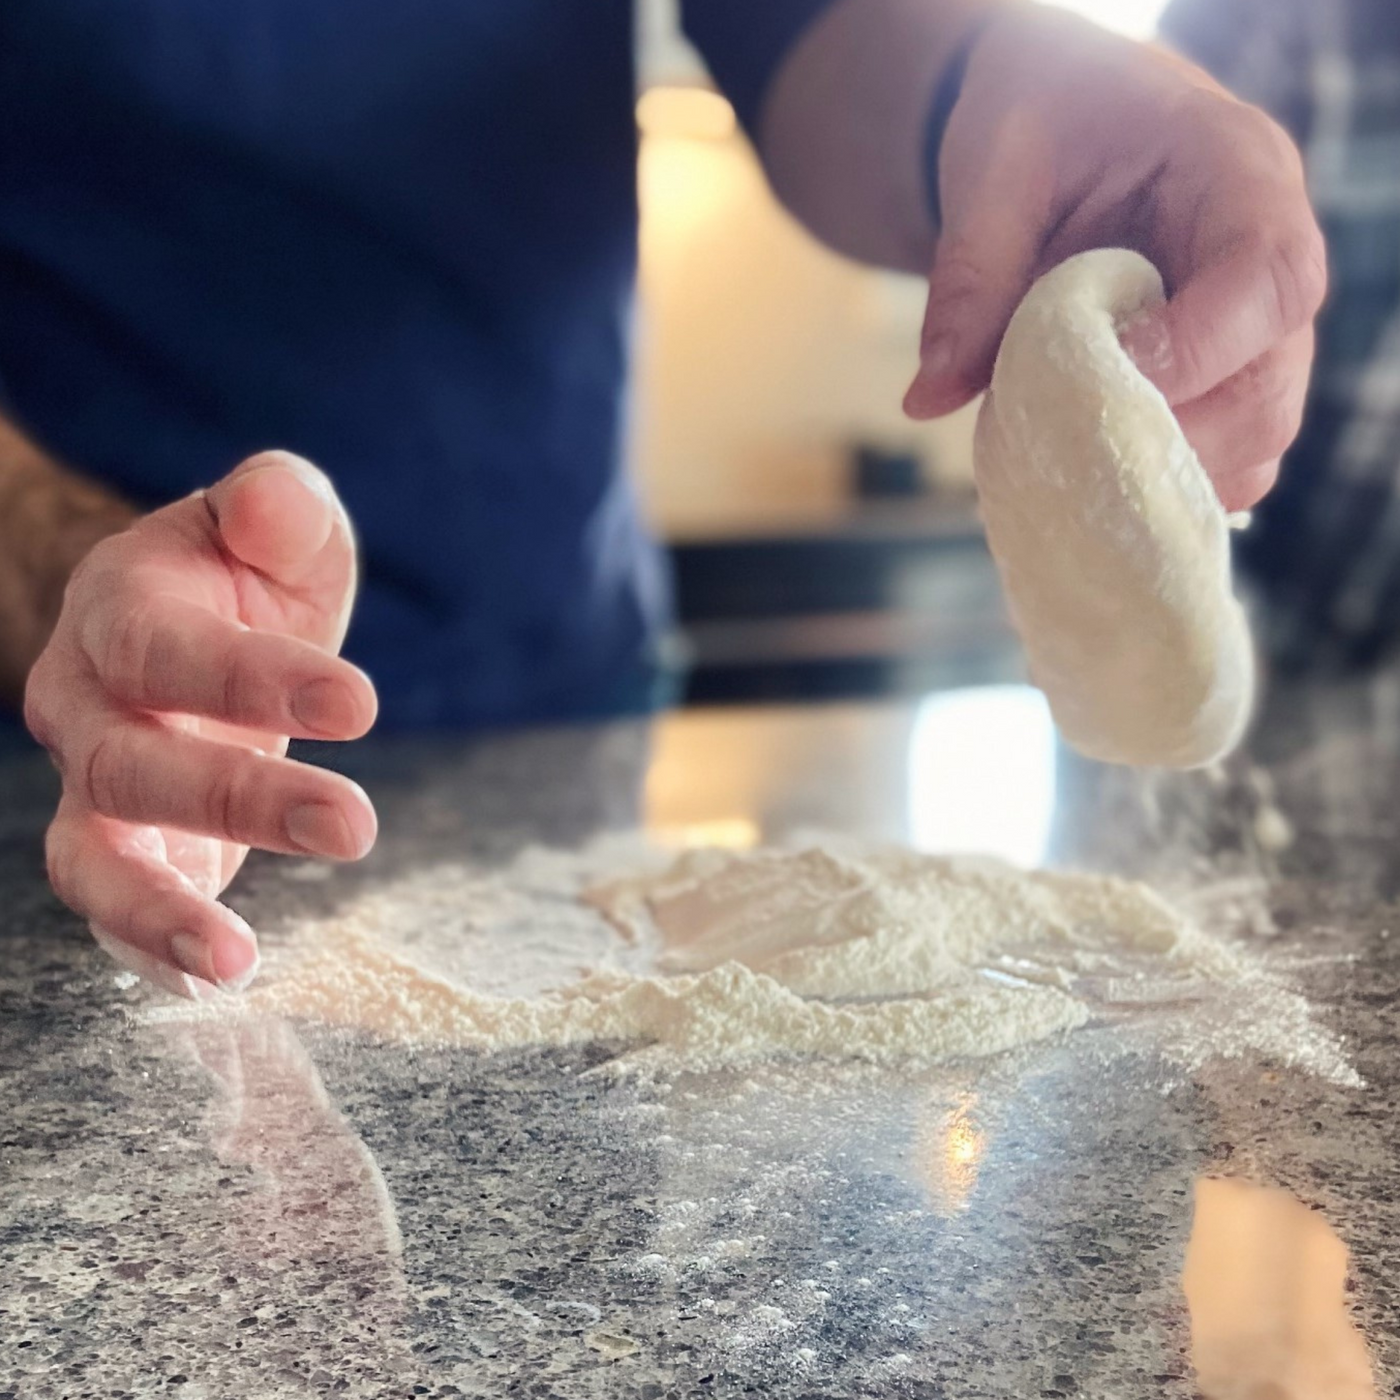 hands working with pizza dough in flour